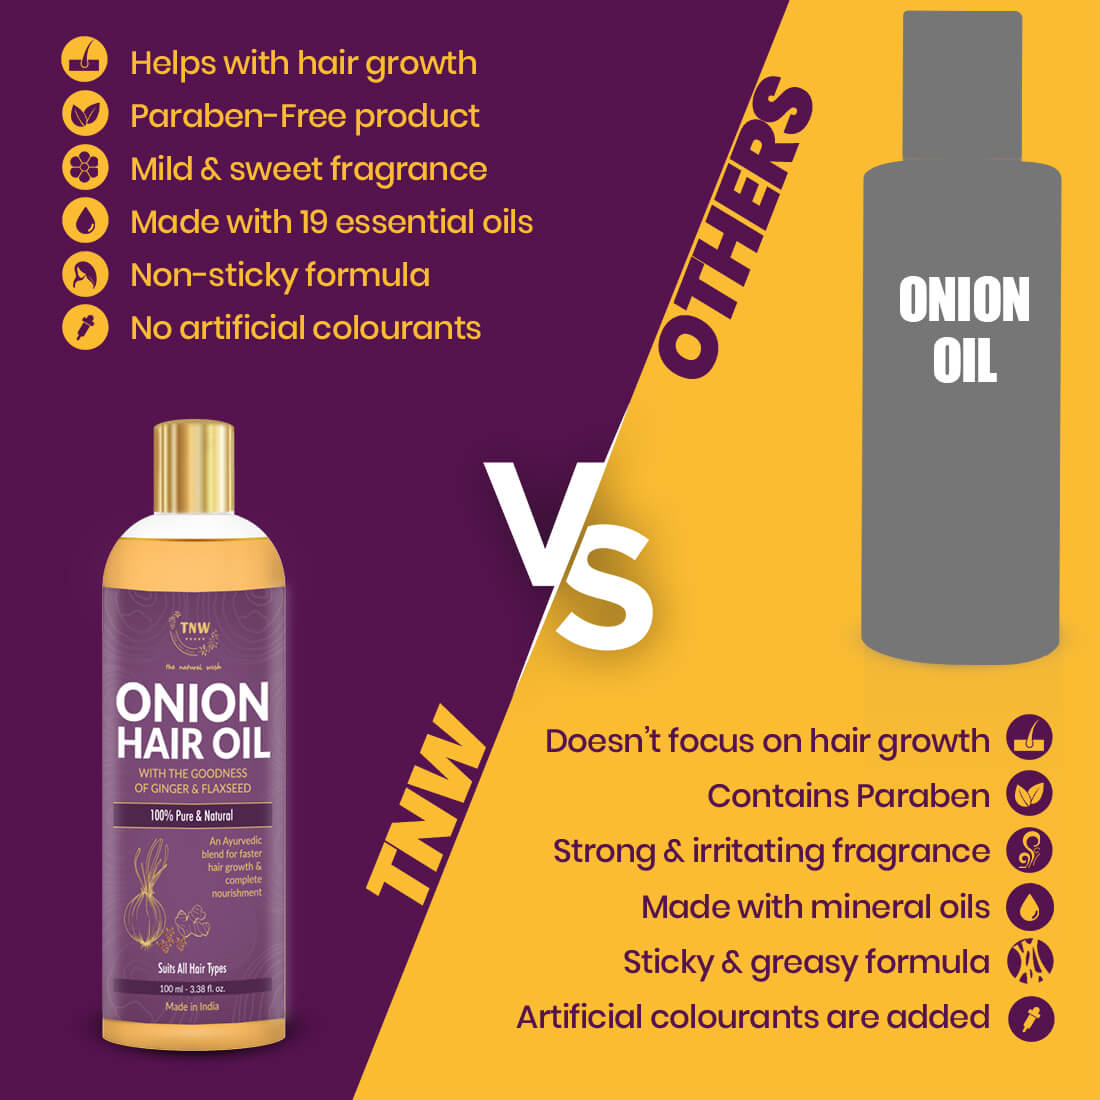 TNW Onion Hair Oil Vs Others